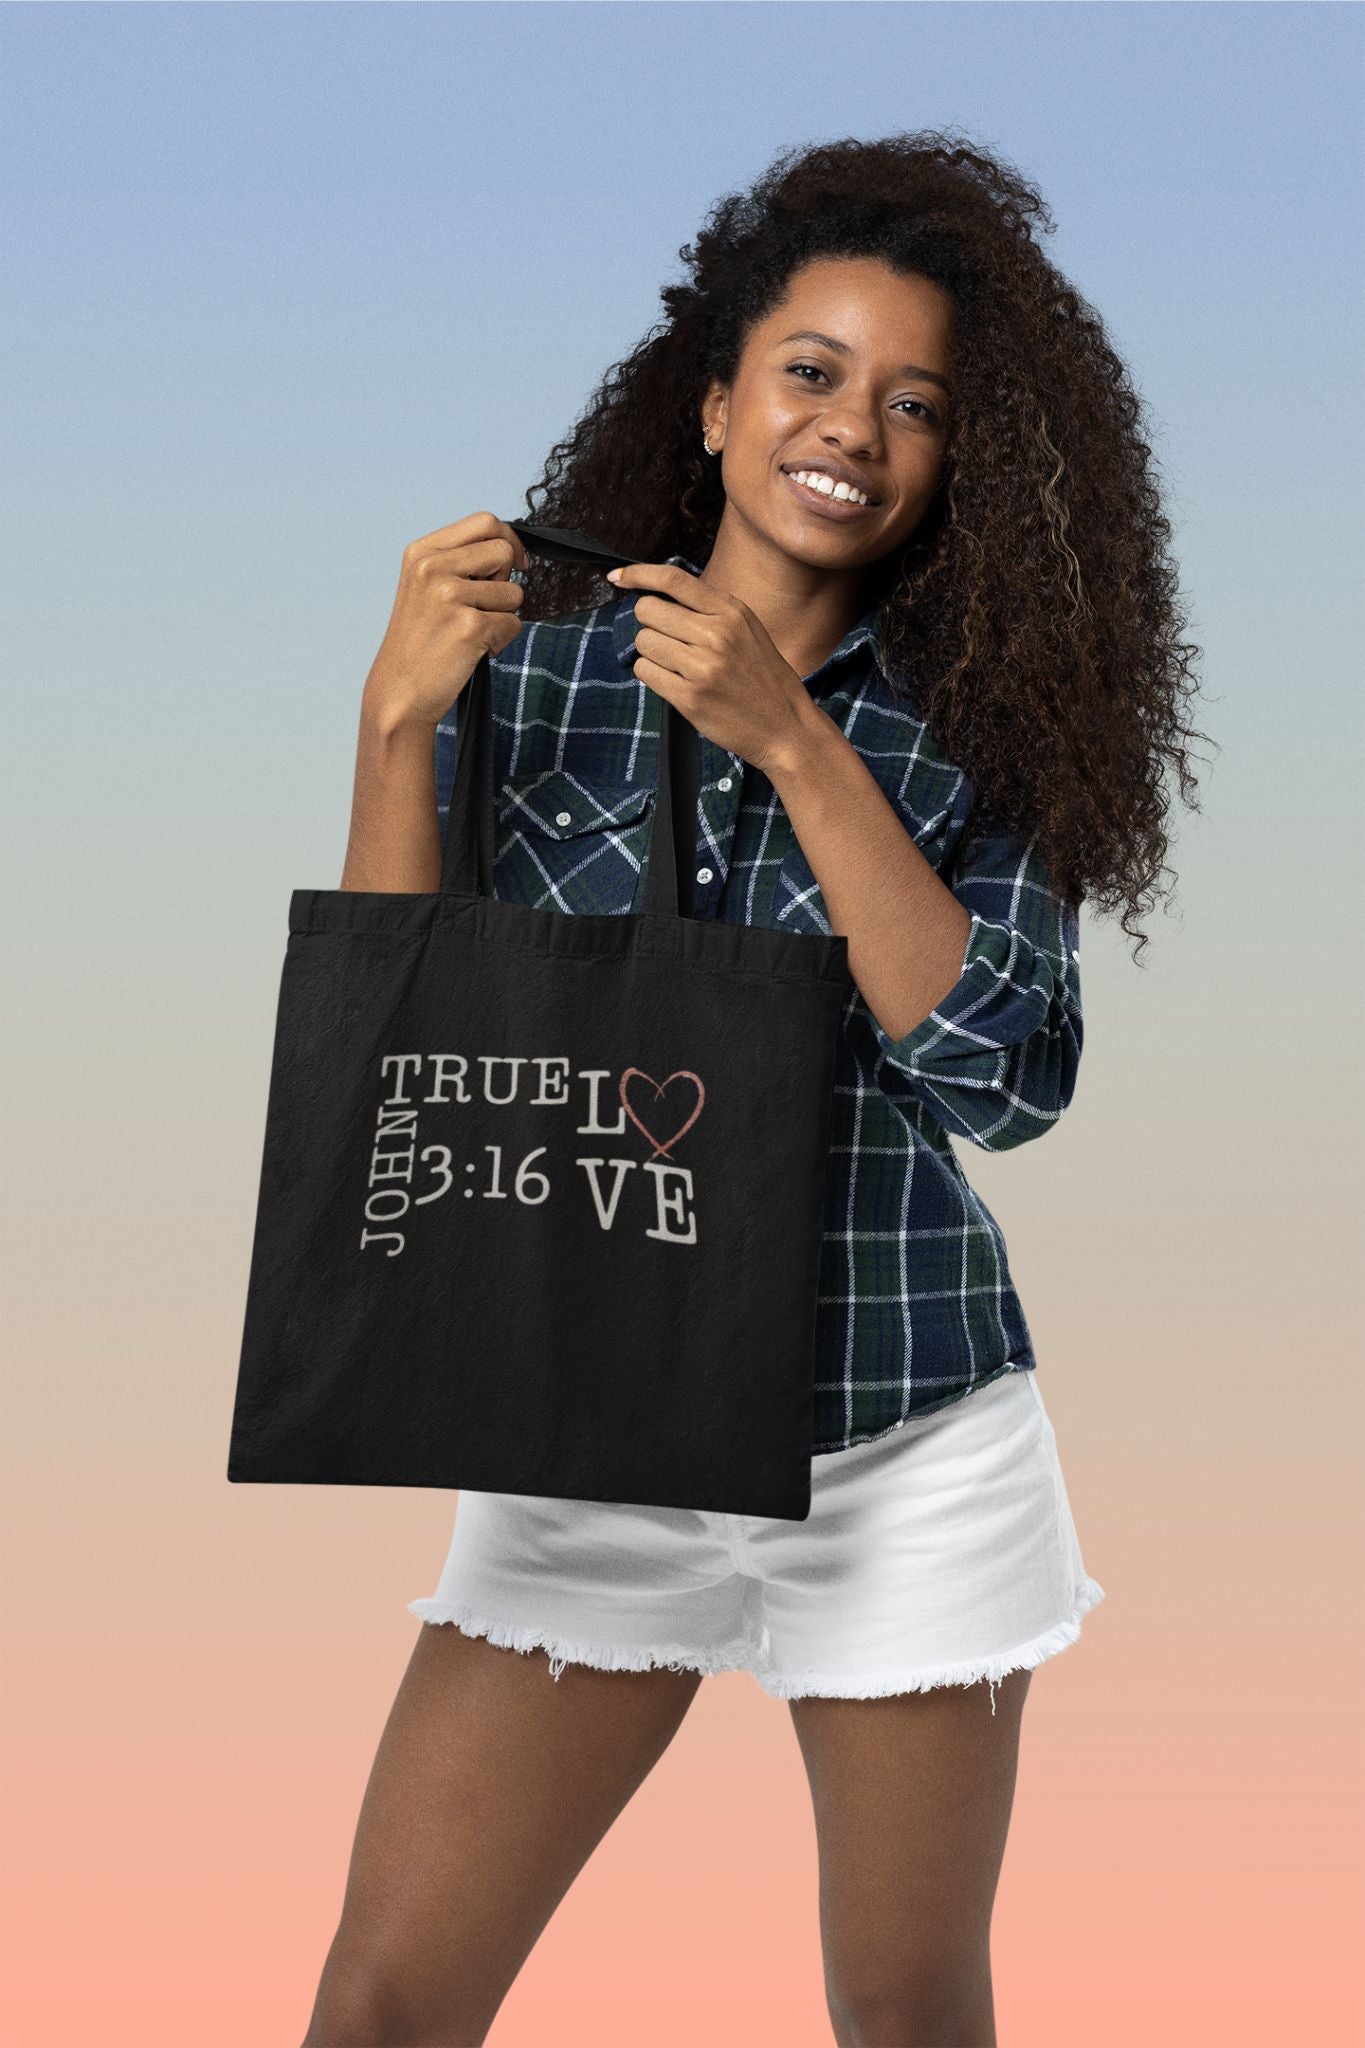 Introducing Craft'd For The Culture's "John 3:16" Tote Bag